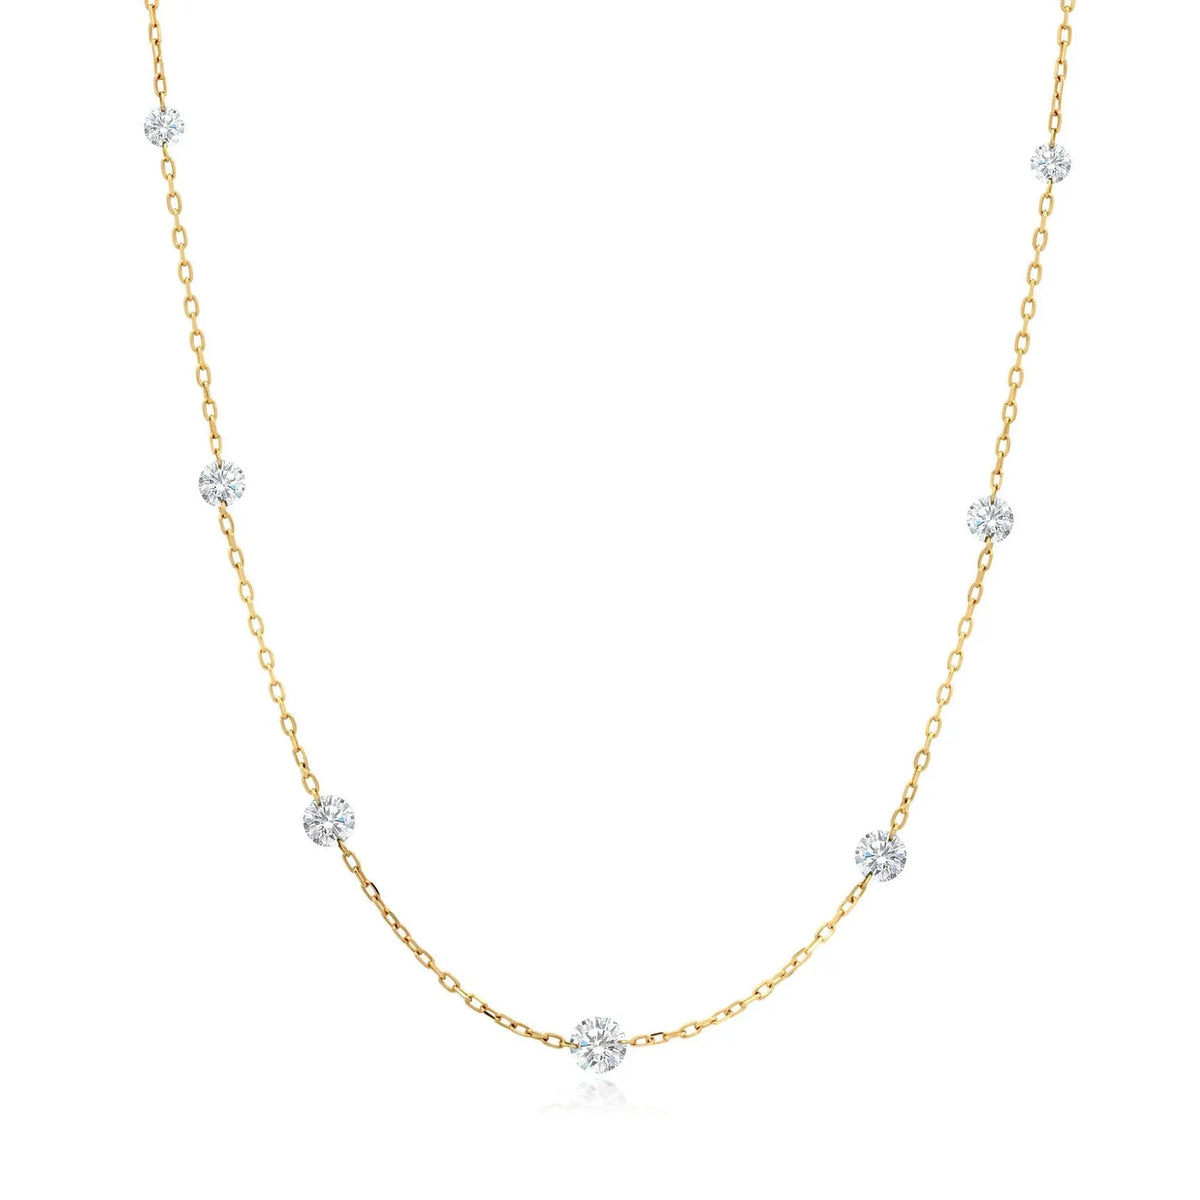 18K yellow gold floating diamond station necklace. Can be worn alone and a great stacking piece  Details:  Gemstone: 1/2 Carats (7 pieces) of G-H Color White Diamonds  Length: 18 inches and adjustable Closure: Spring Ring Designed by Graziela Gems